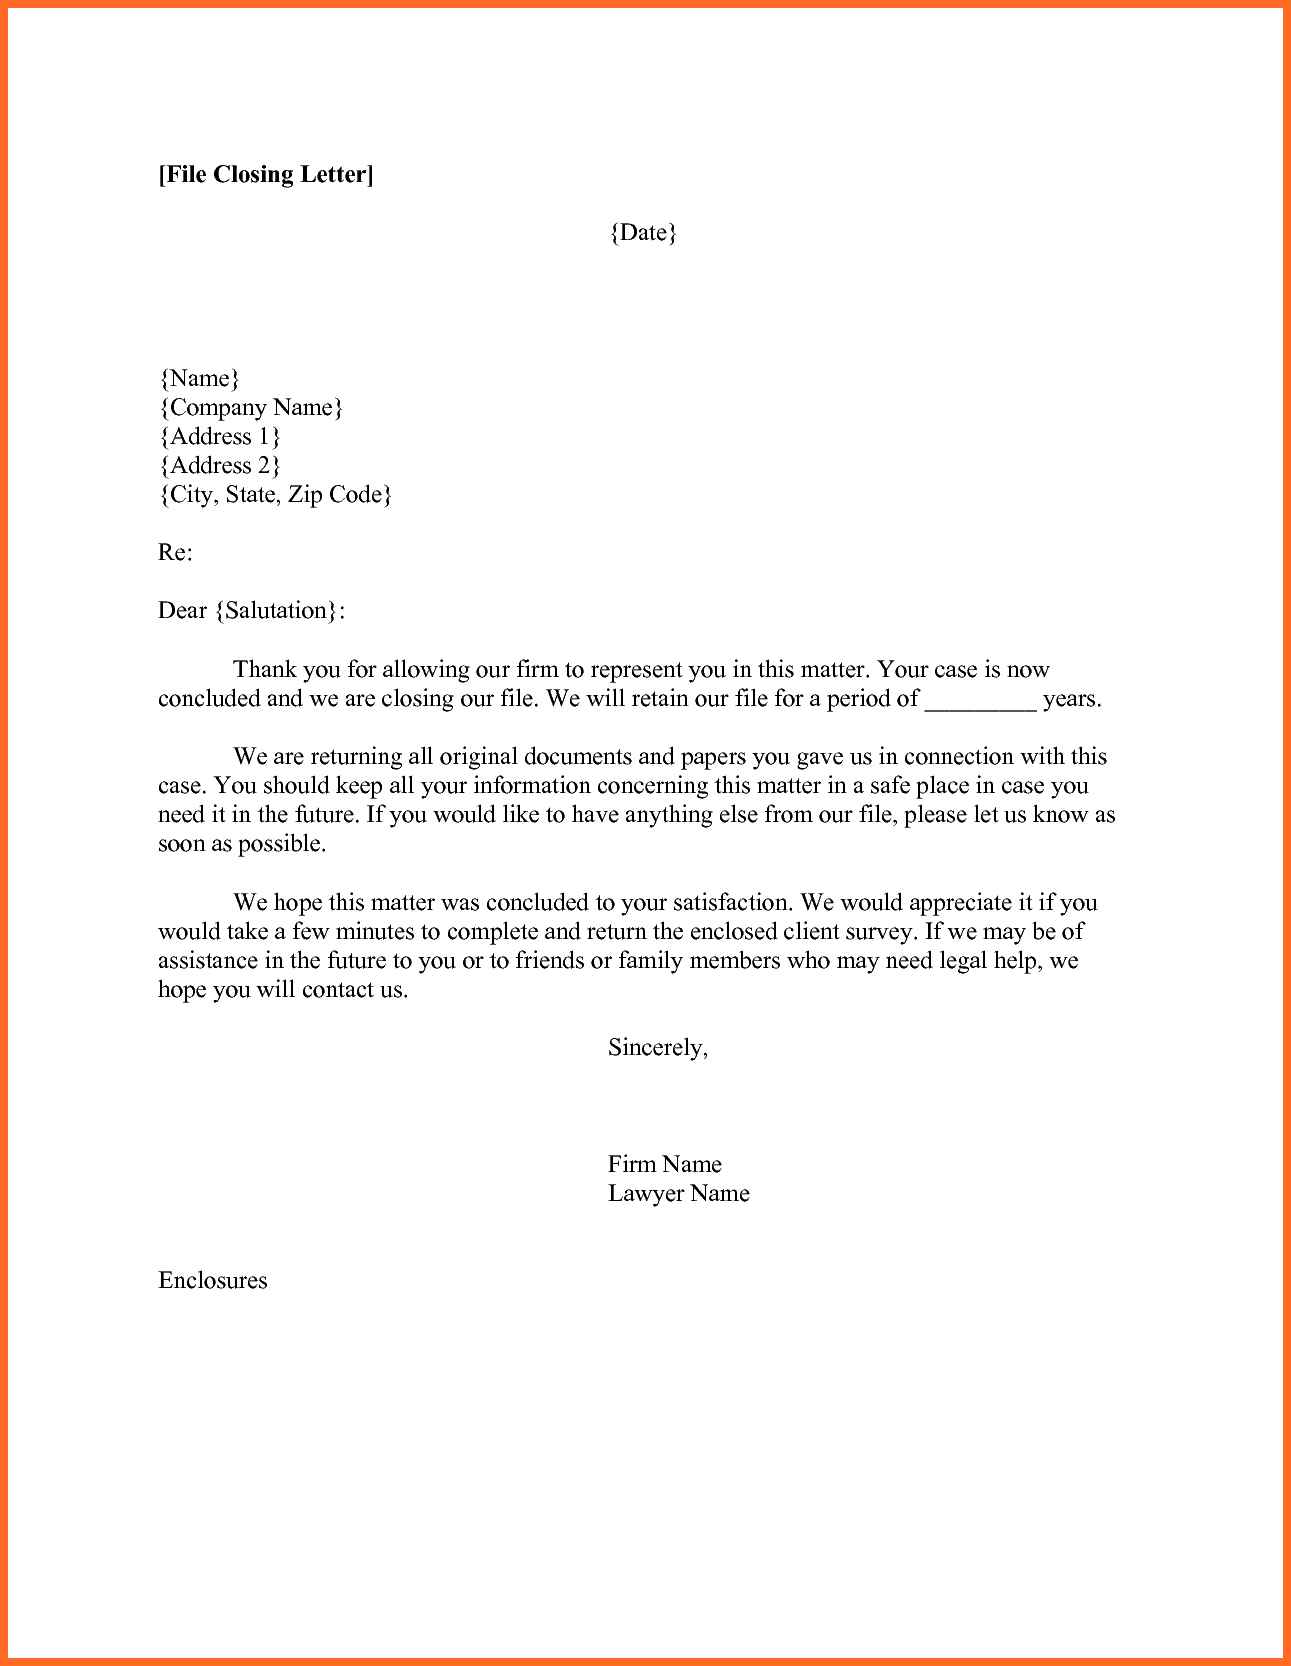 Business Letter Closing Letter Closing Examples Business Letter 